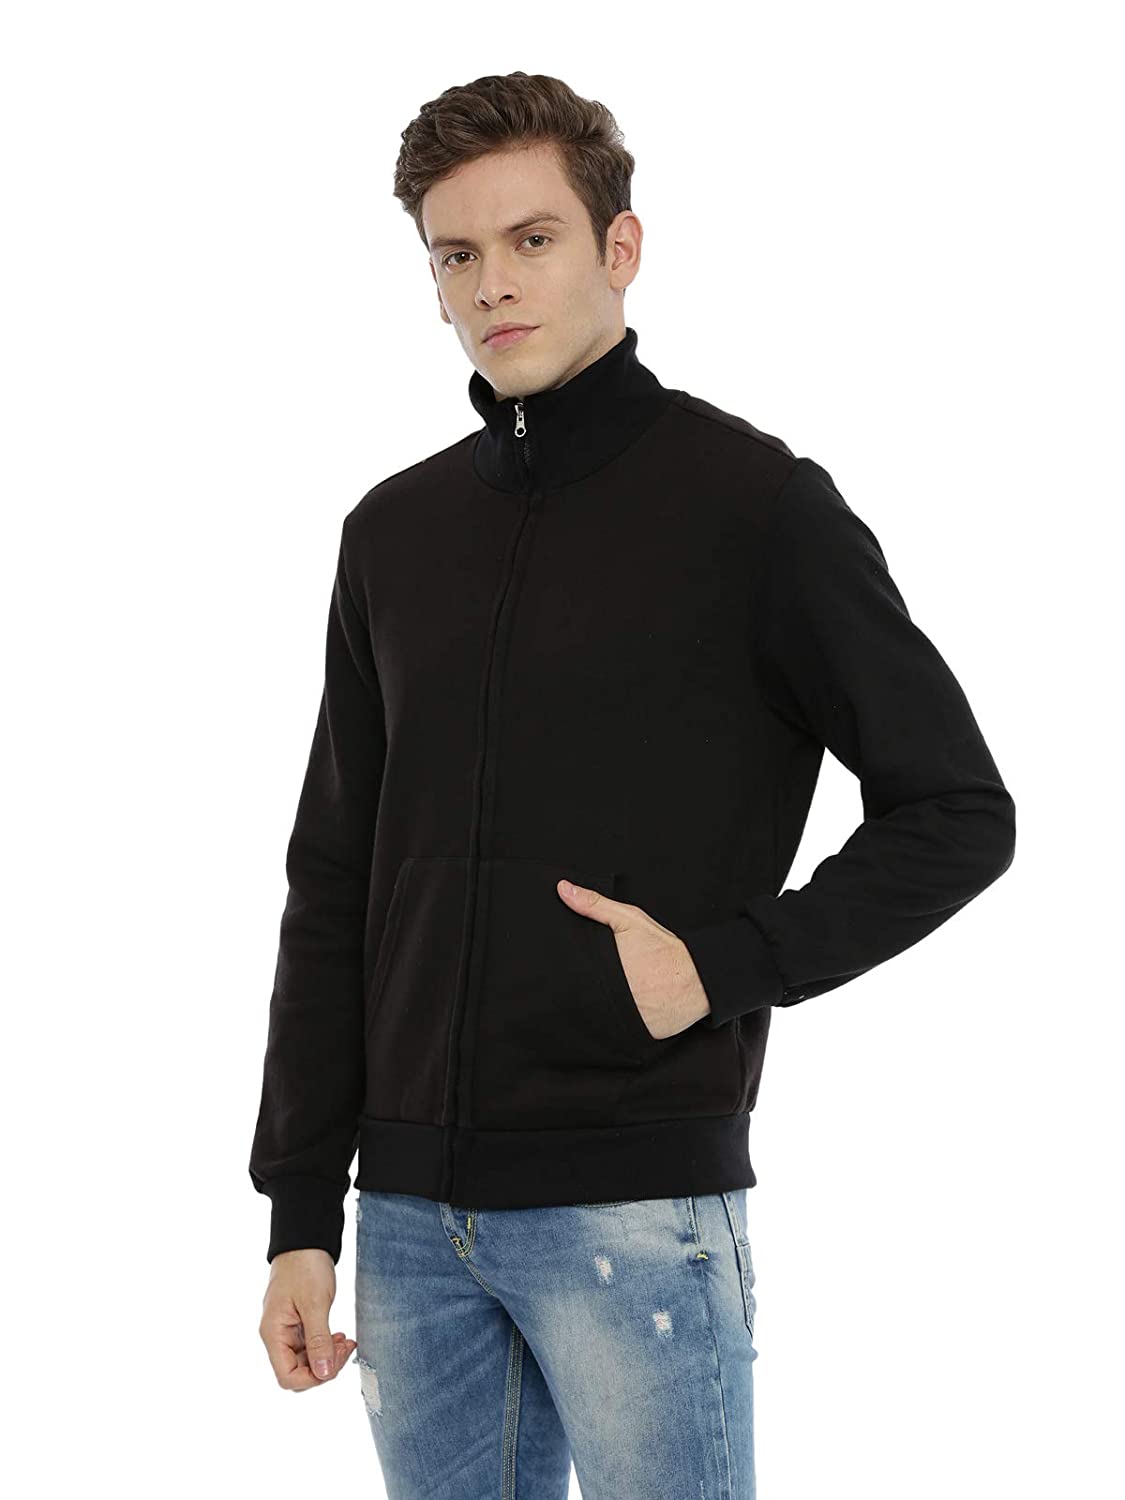 C&D By Monte Carlo High Neck Black Jacket | 6220617914-1 | Cilory.com